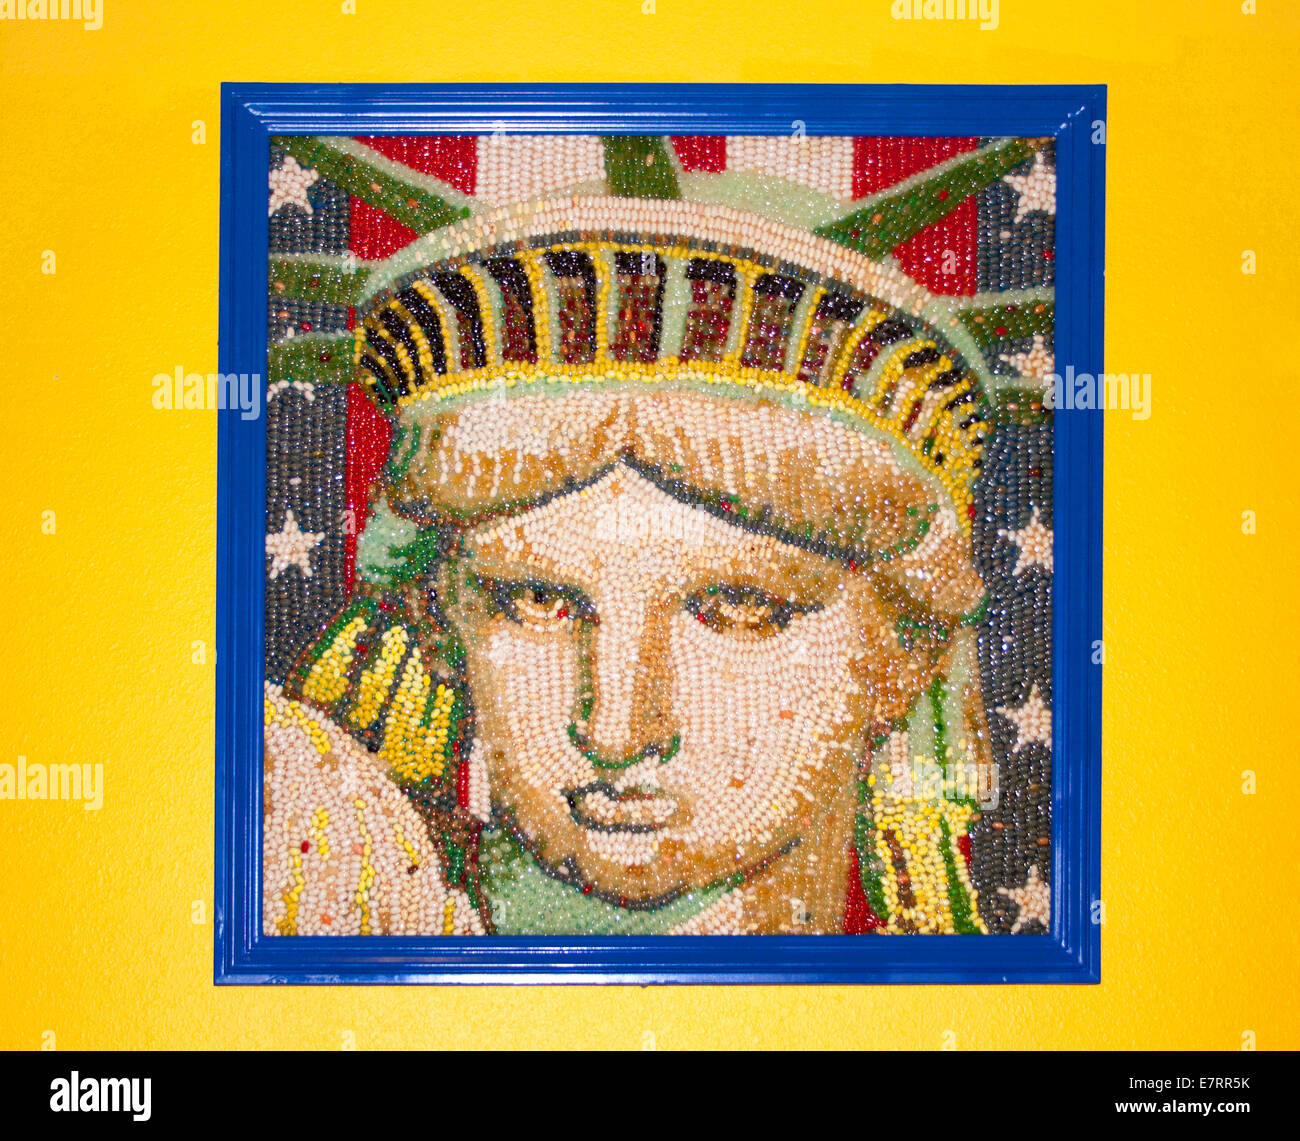 Statue of Liberty portrait at the Jelly Belly Factory Museum in Fairfield California Stock Photo